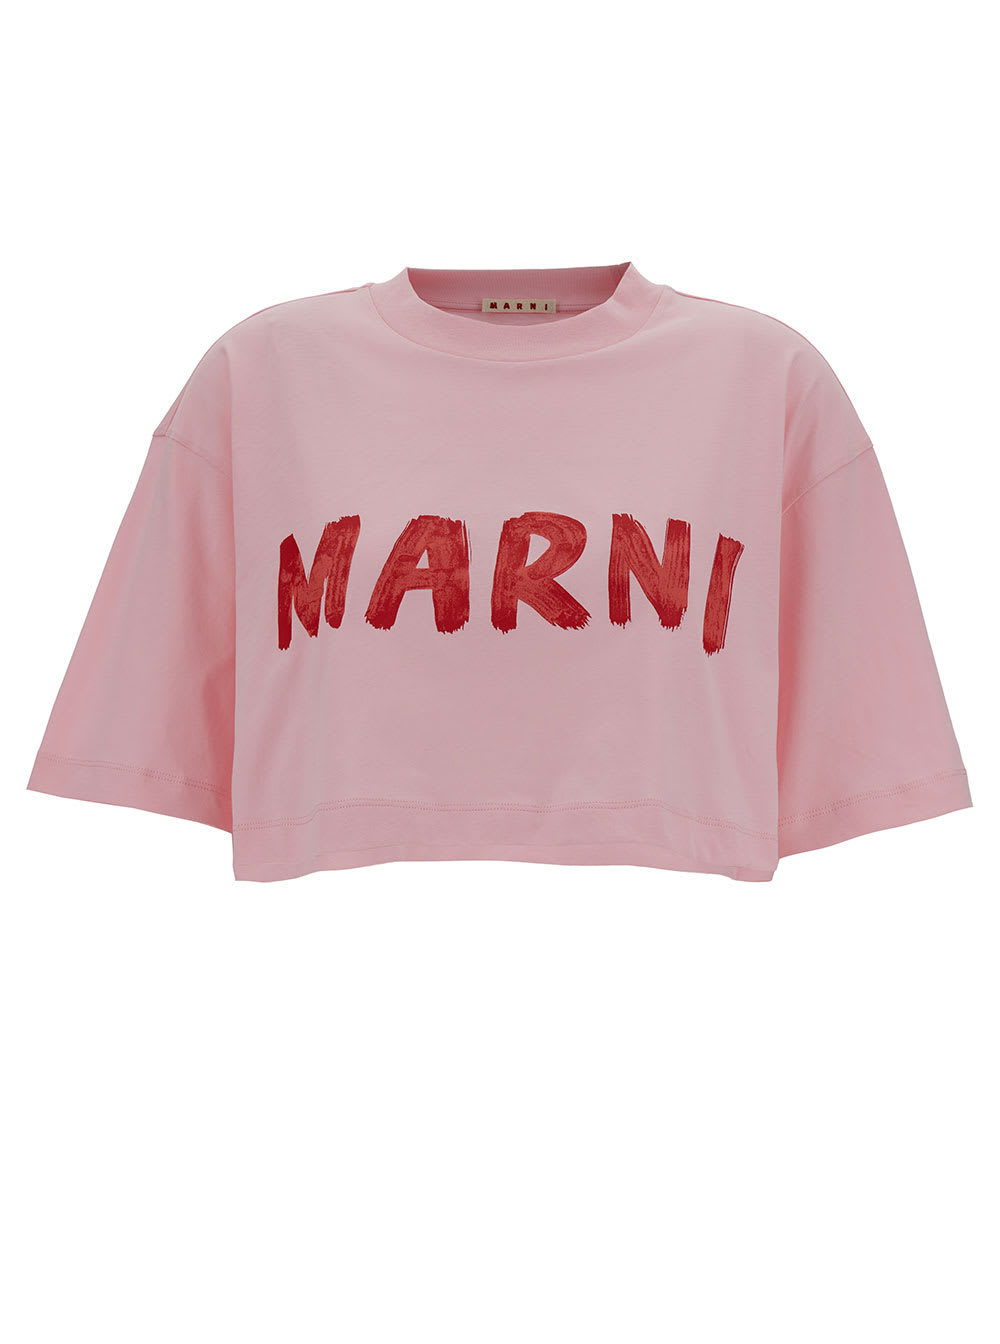 MARNI PINK CROPPED T-SHIRT WITH LOGO PRINT IN COTTON WOMAN